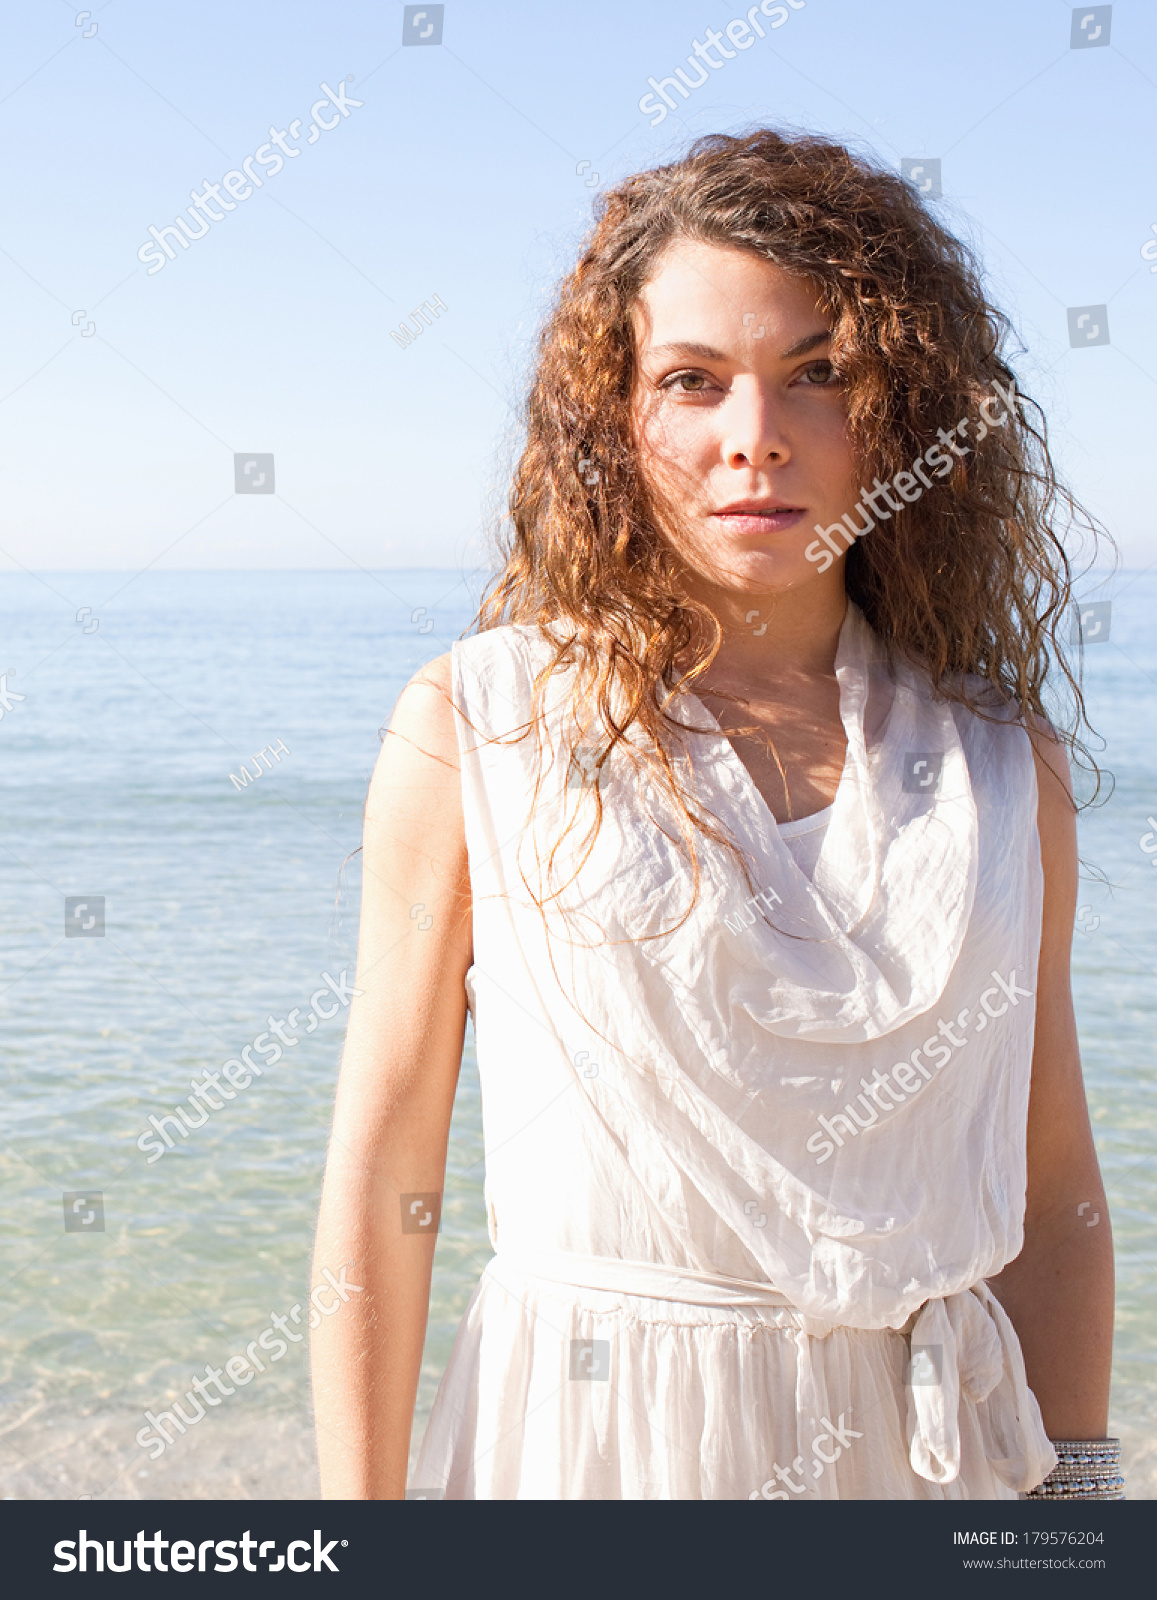 Portrait of a beautiful young woman standing and relaxing on a white sand beach with an intense blue sky on a summer holiday by the sea during a sunny day. Outdoors health and travel lifestyle. #179576204